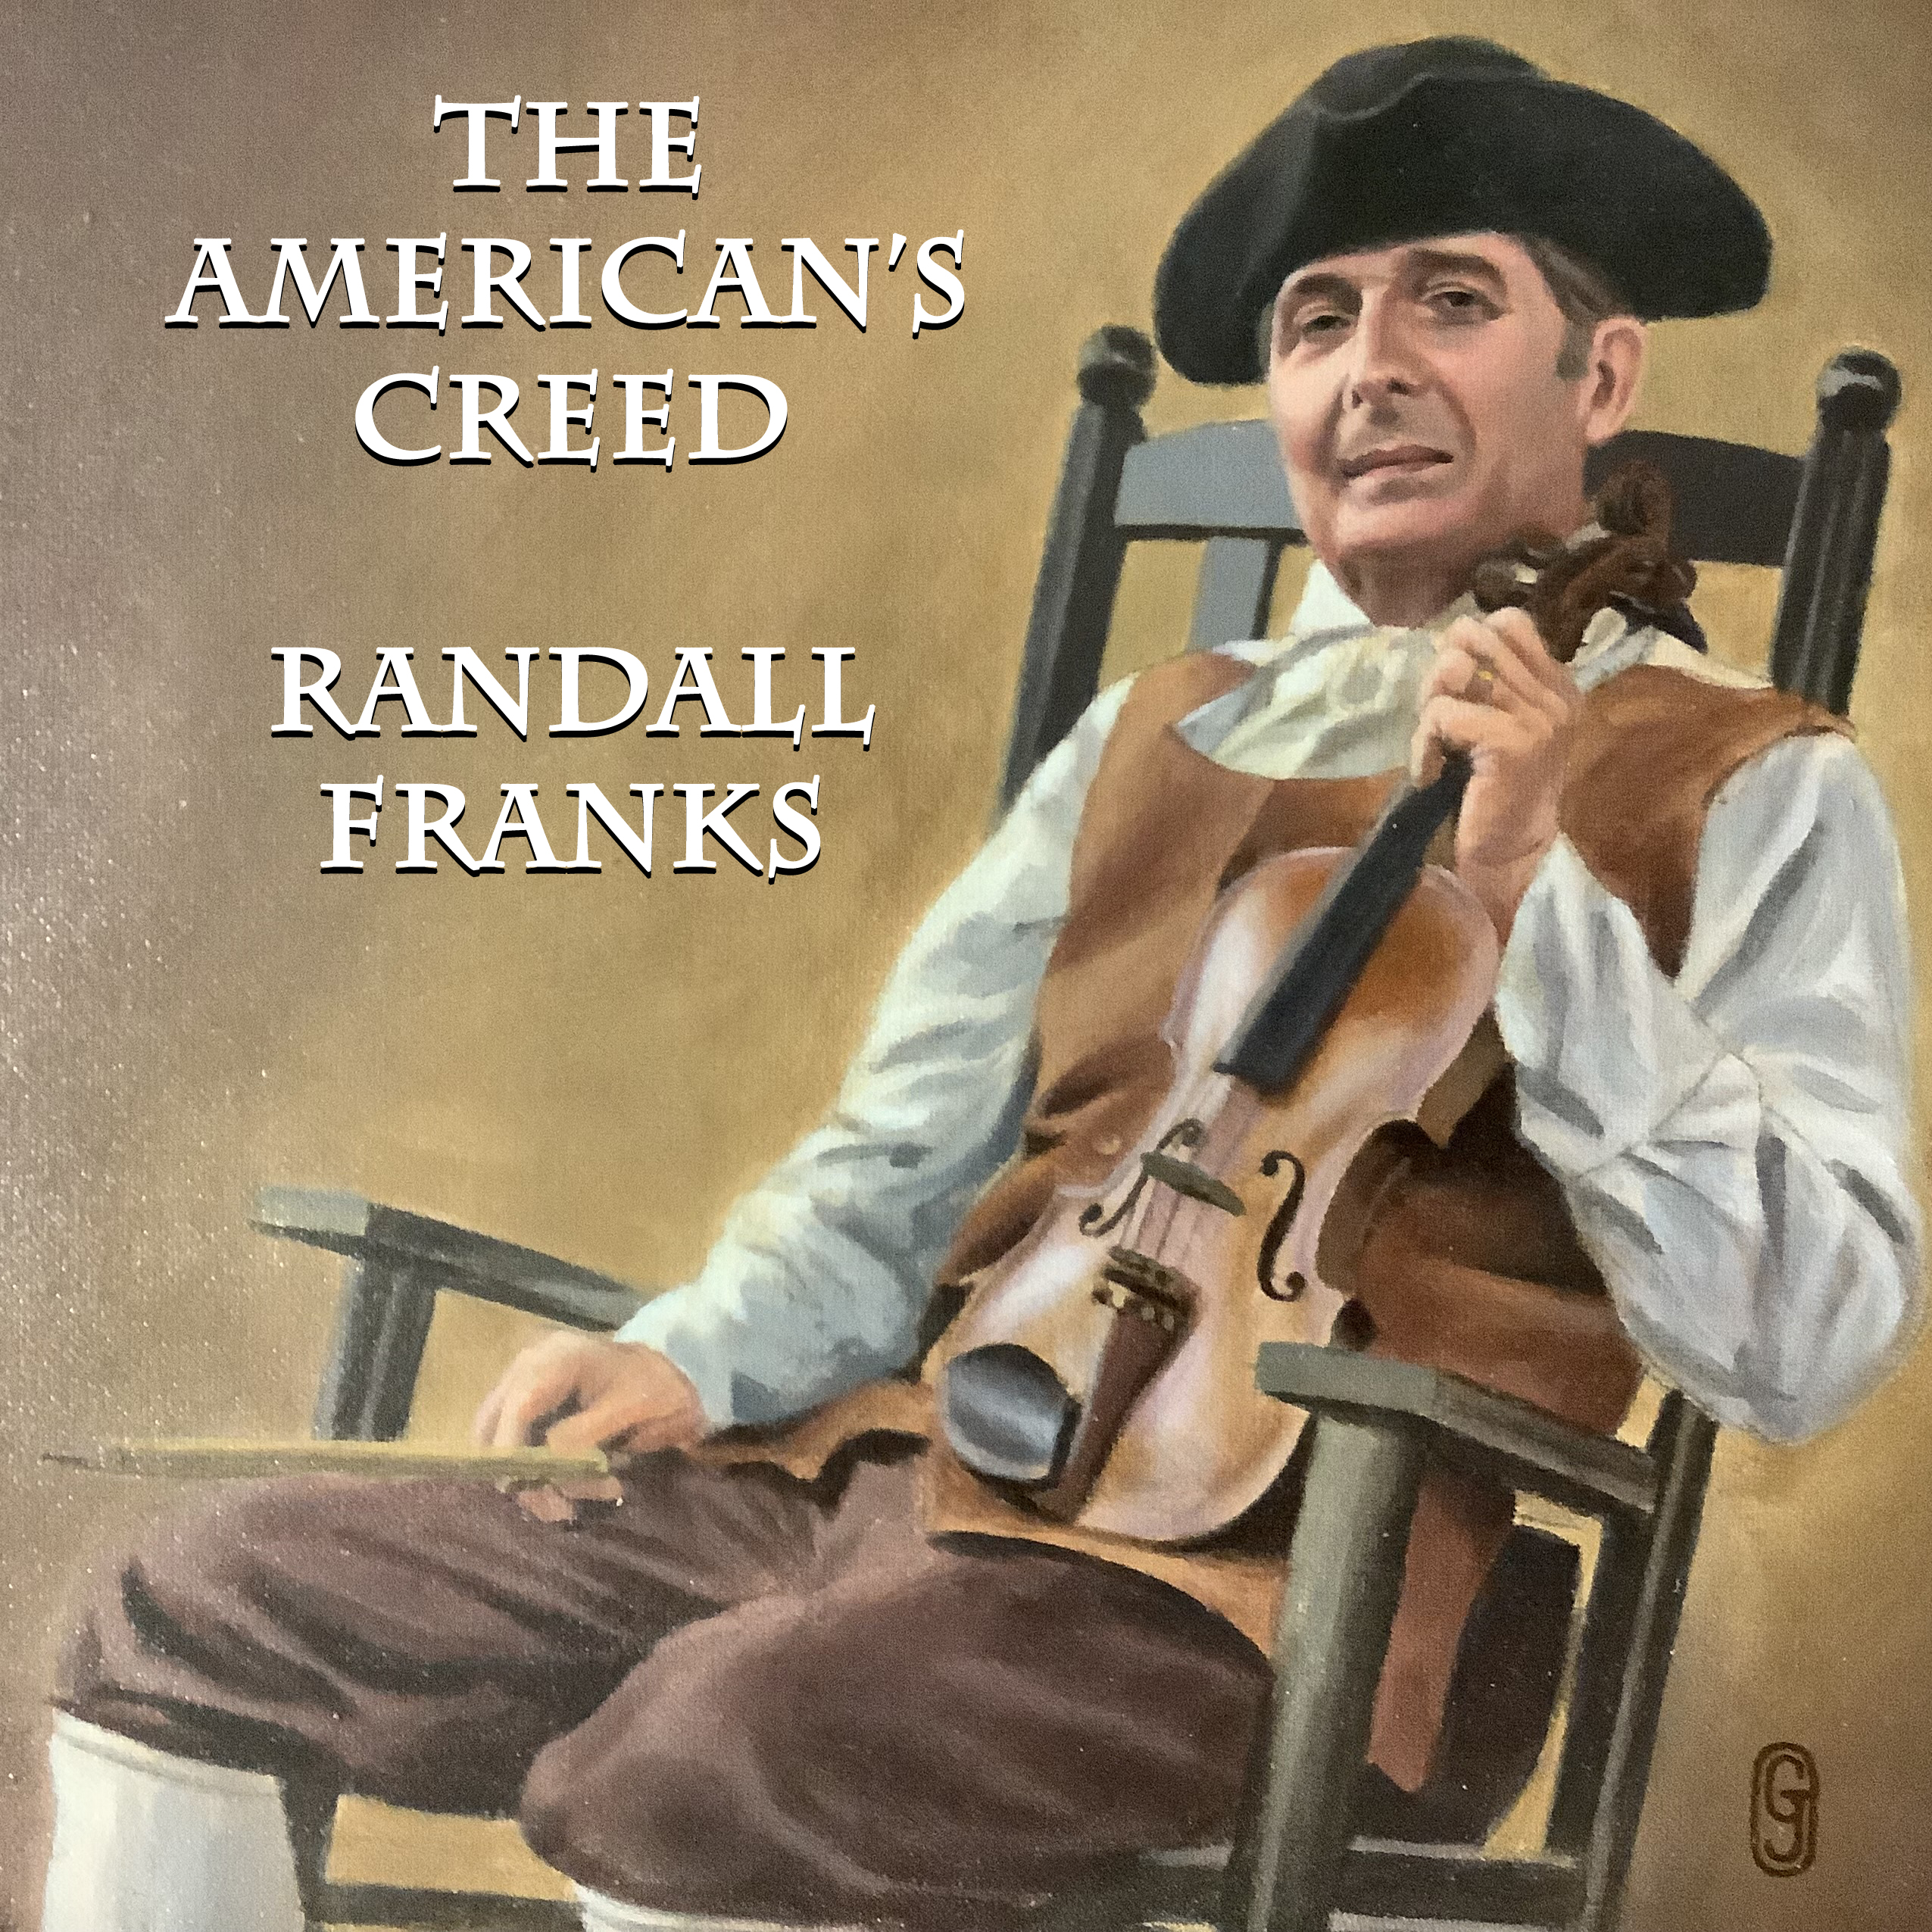 Appalachian humorist/actor Randall Franks will release comedy tribute to Andy Griffith